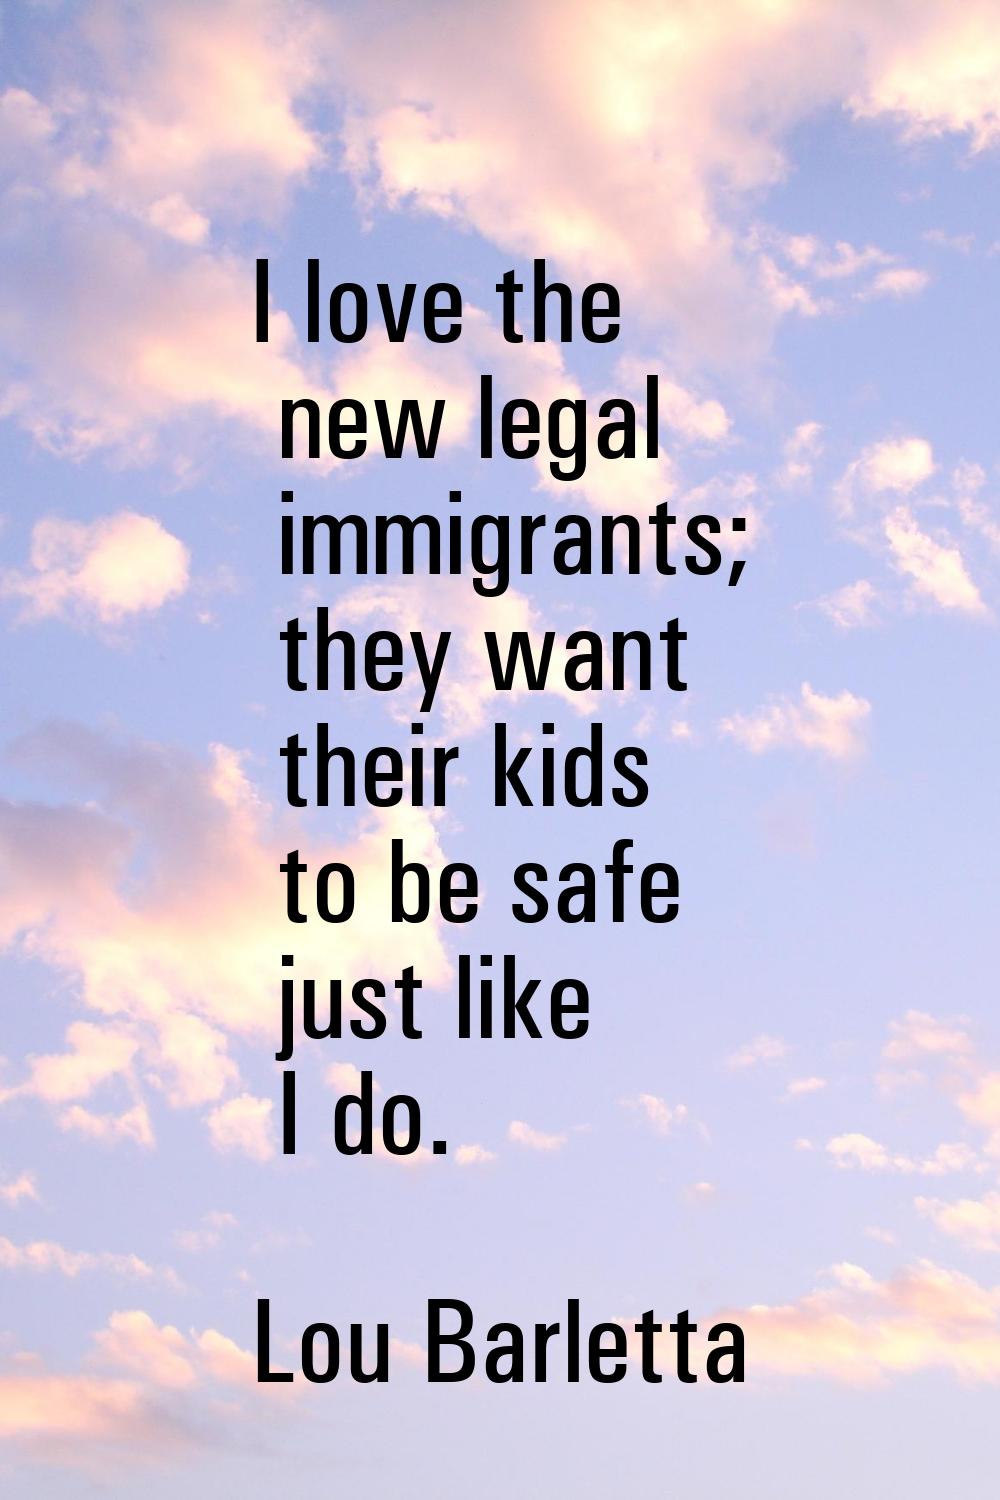 I love the new legal immigrants; they want their kids to be safe just like I do.